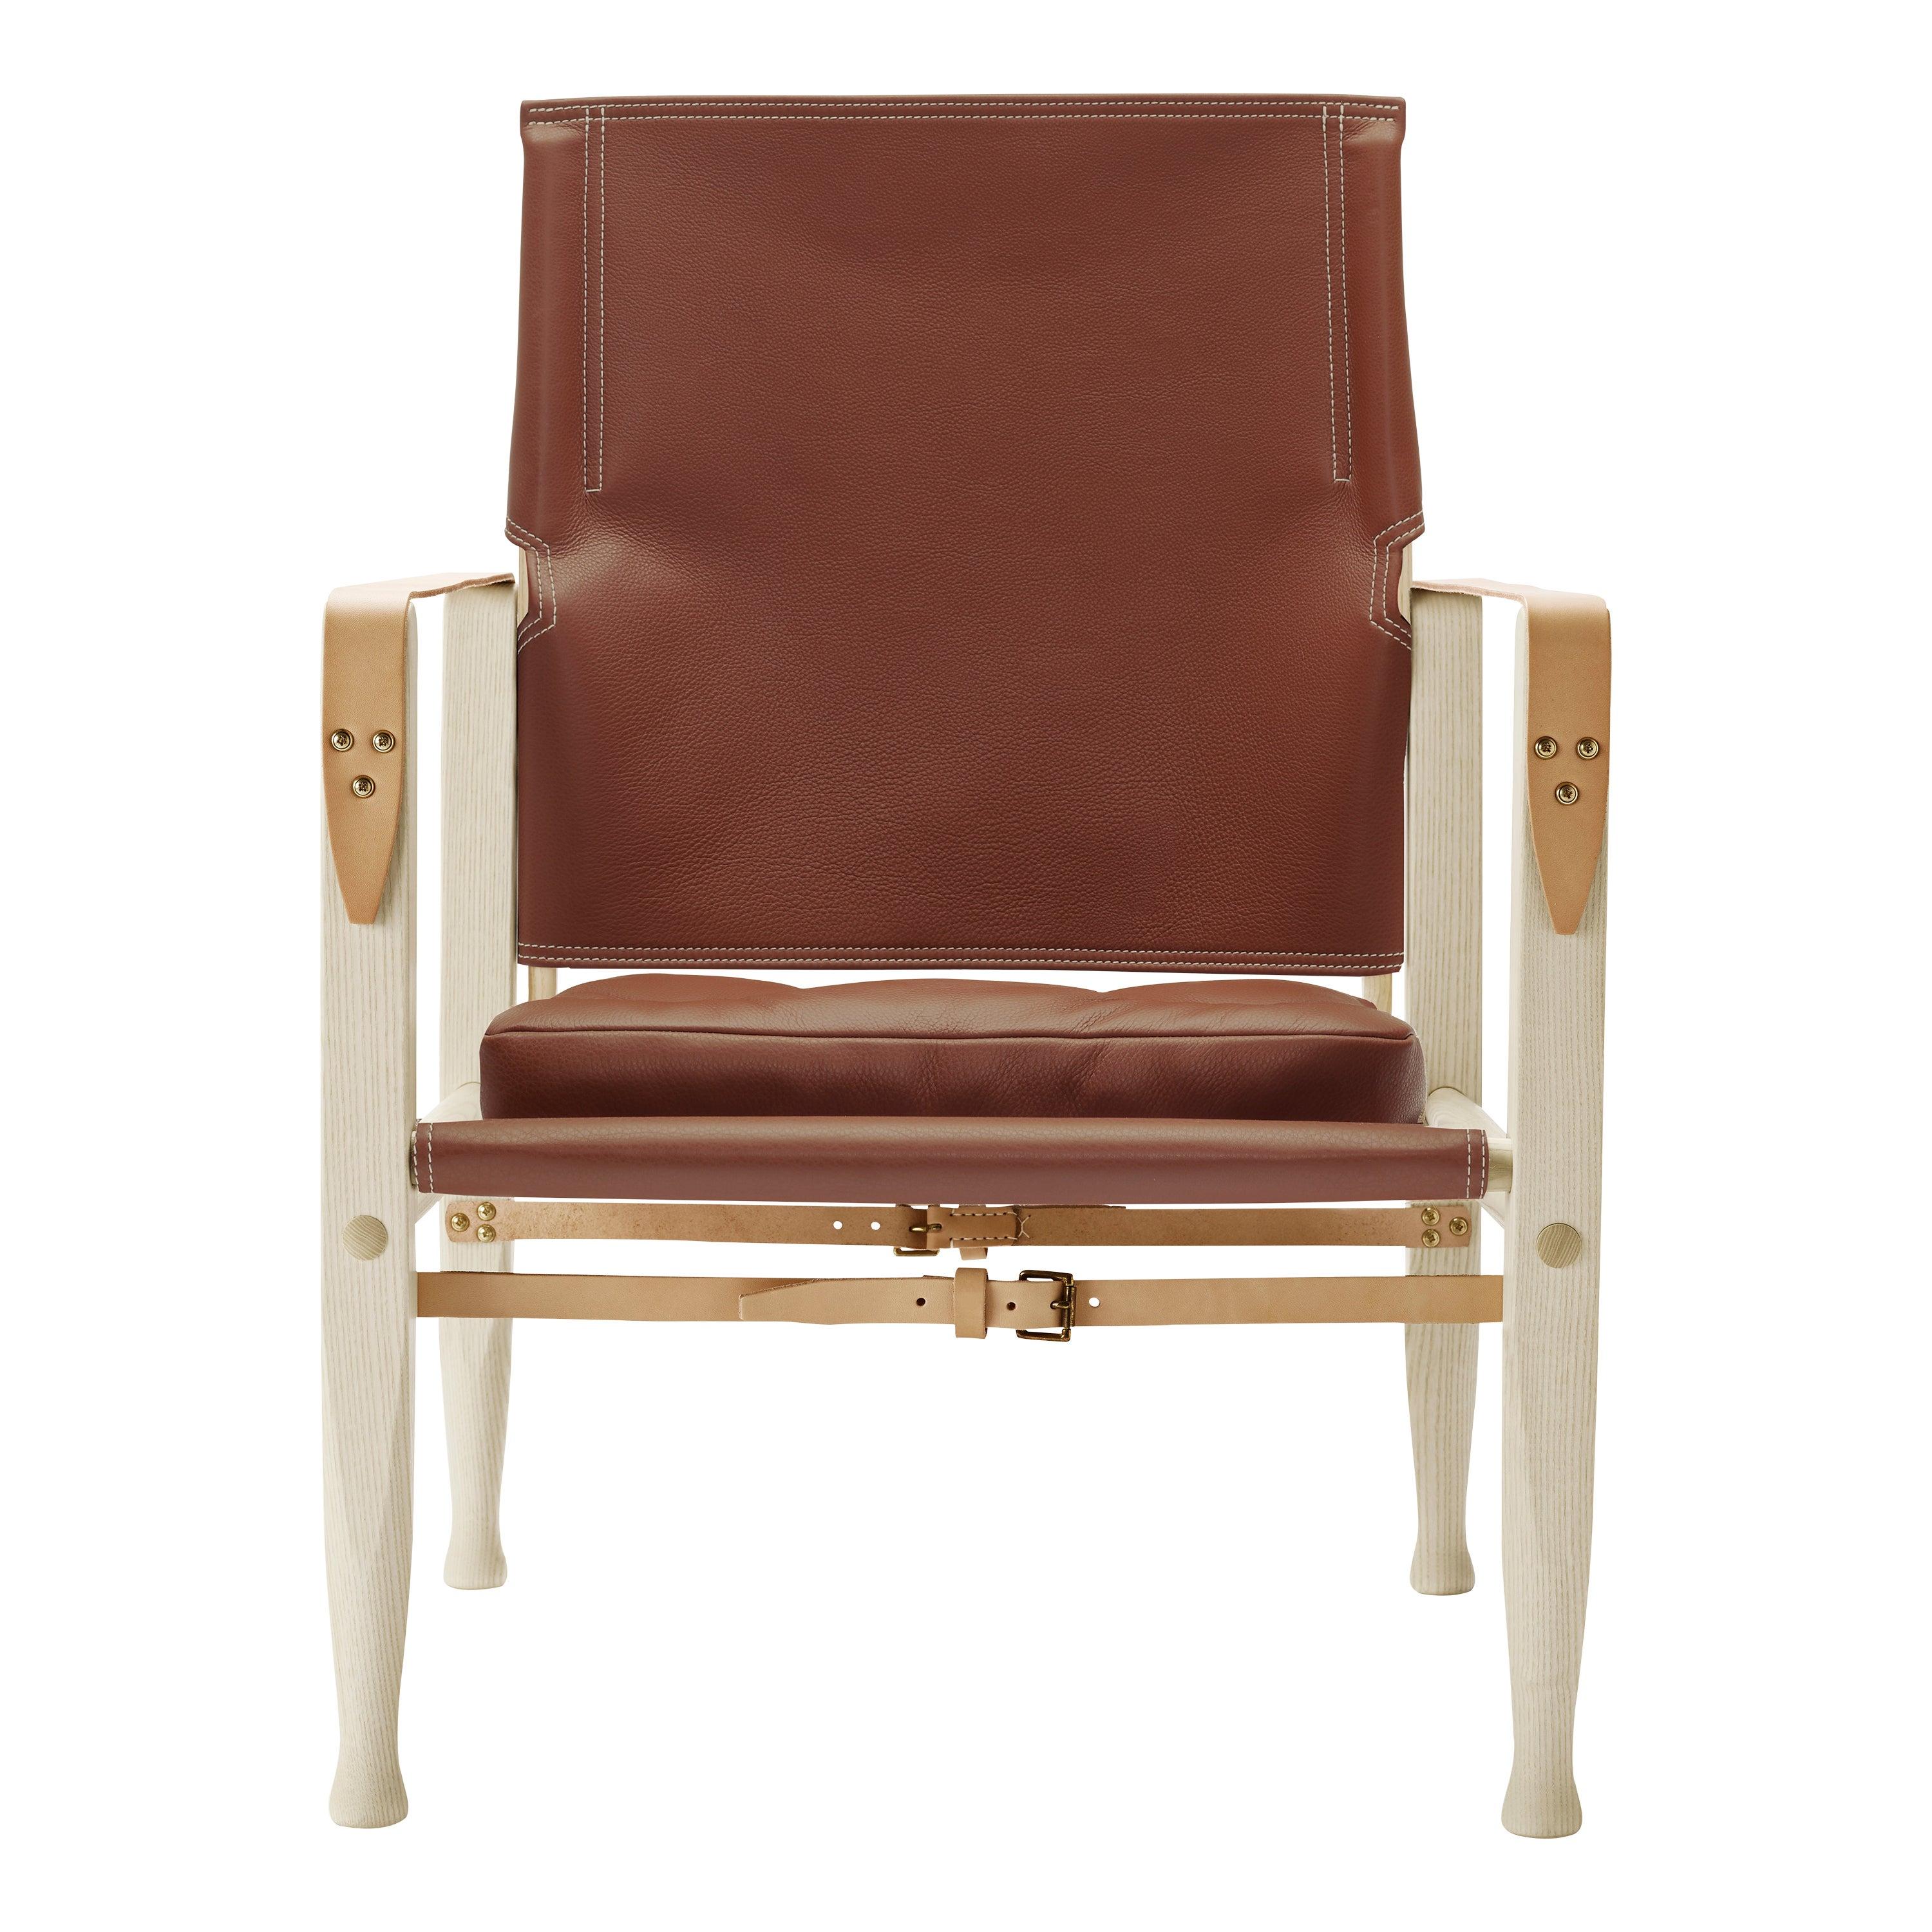 KK47000 Safari Chair in Thor 307 Leather with Ash Oil by Kaare Klint